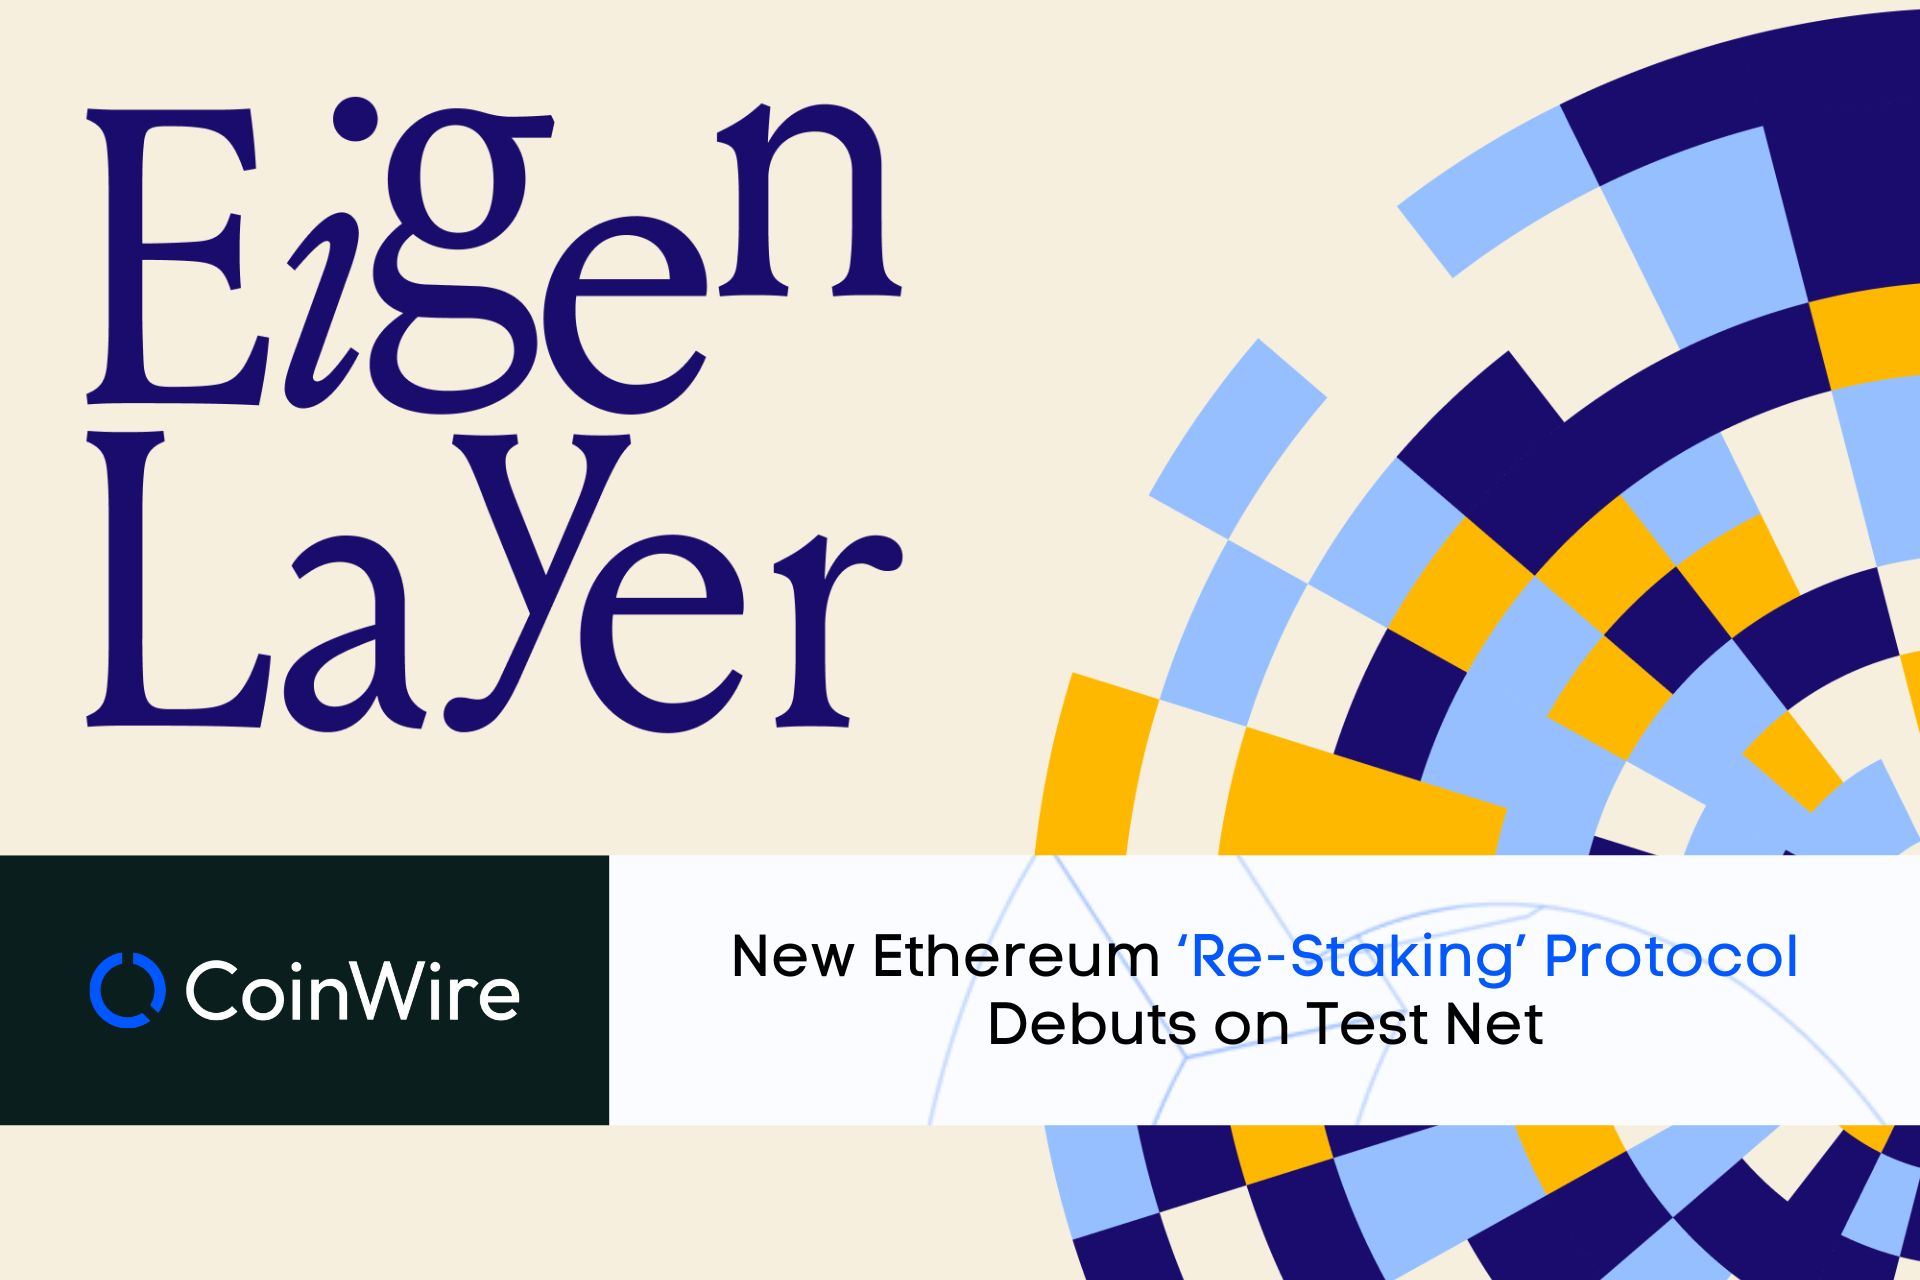 New Ethereum ‘Re-Staking’ Protocol - Eigenlayer Debuts On Testnet